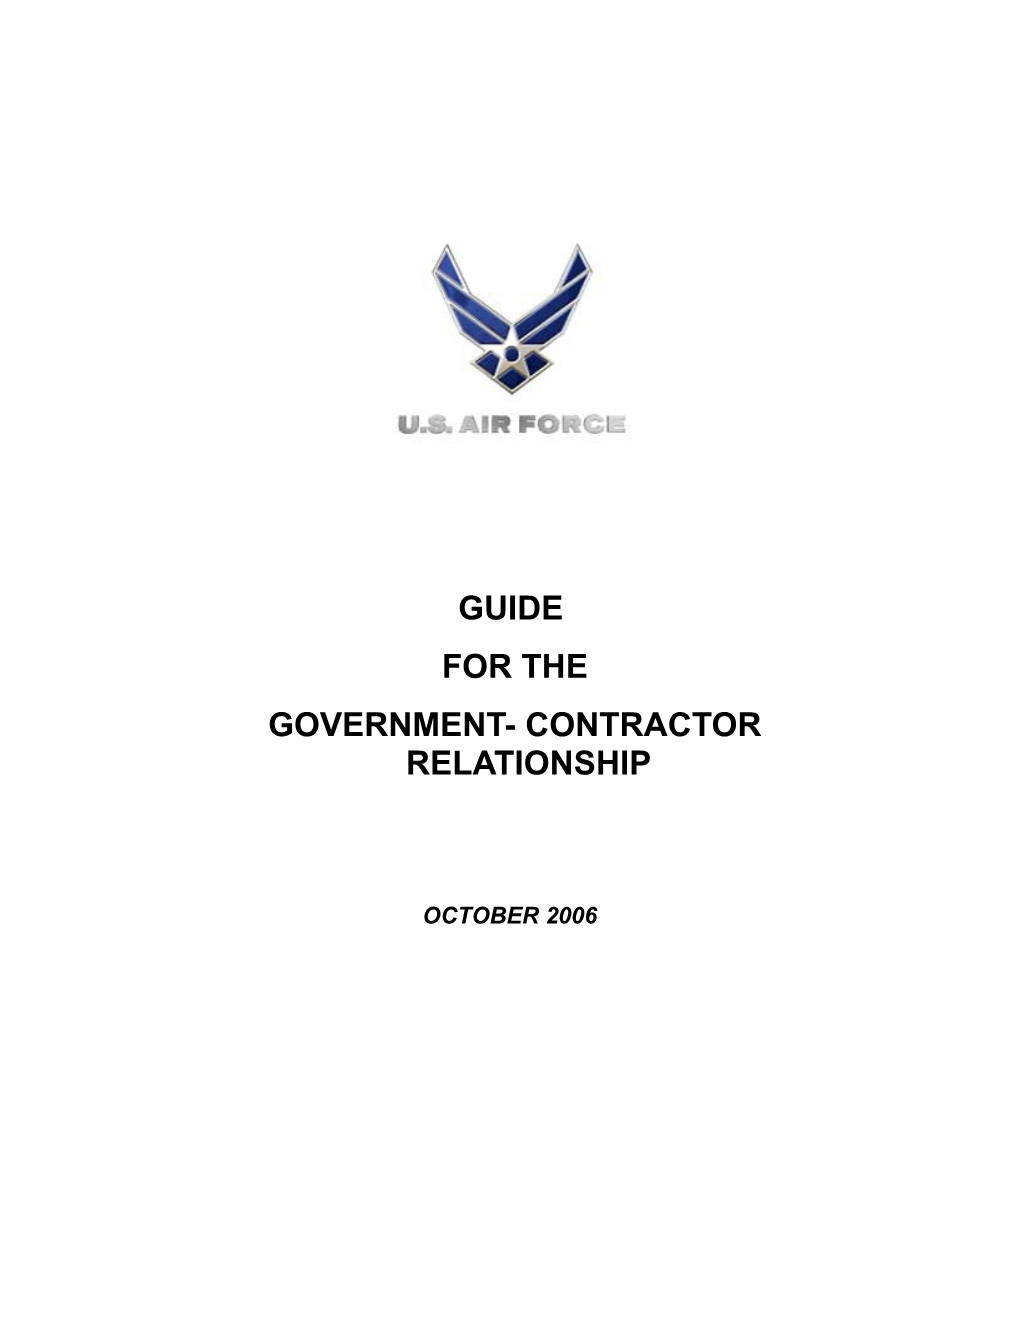 Guidelines for Contractor Relationships